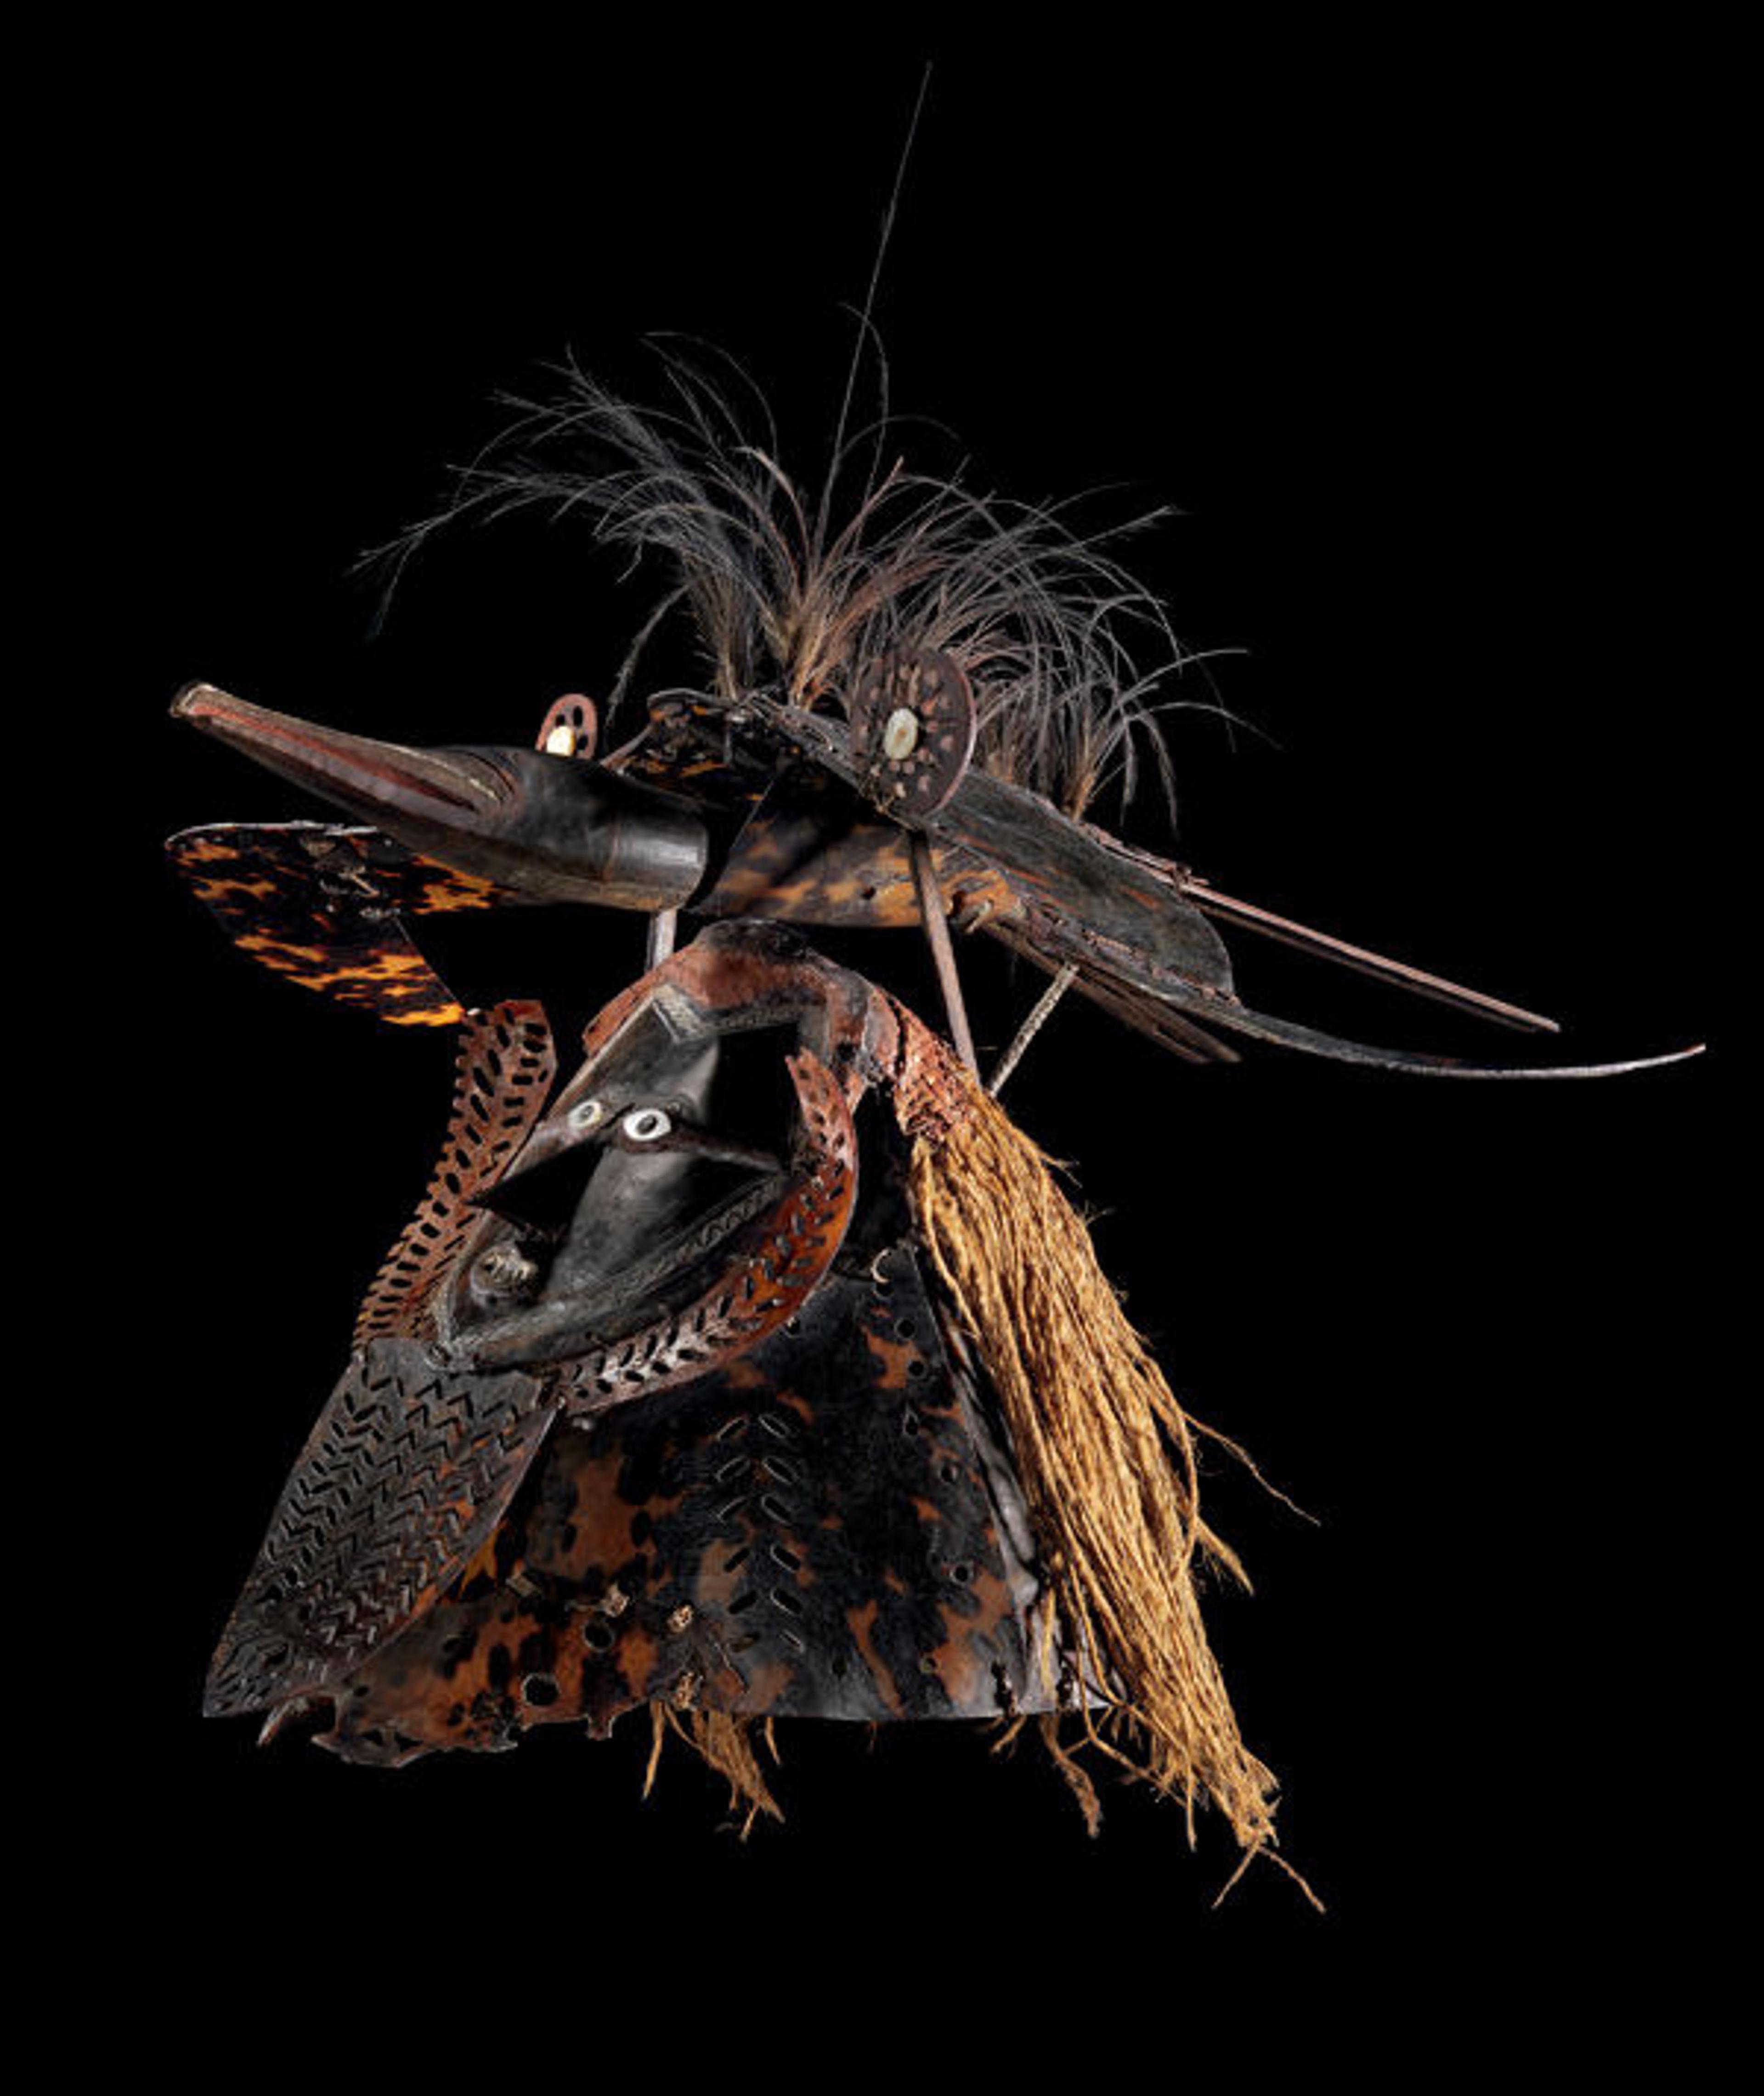 Mask (Buk, Krar, or Kara), mid- to late 19th century. Australia, Mabuiag Island, Queensland, Torres Strait. Turtle shell, wood, cassowary feathers, fiber, resin, shell, paint; H. 21 1/2 x W. 25 x D. 22 3/4 in. (54.6 x 63.5 x 57.8 cm). The Metropolitan Museum of Art, New York, The Michael C. Rockefeller Memorial Collection, Purchase, Nelson A. Rockefeller Gift, 1967 (1978.412.1510) 